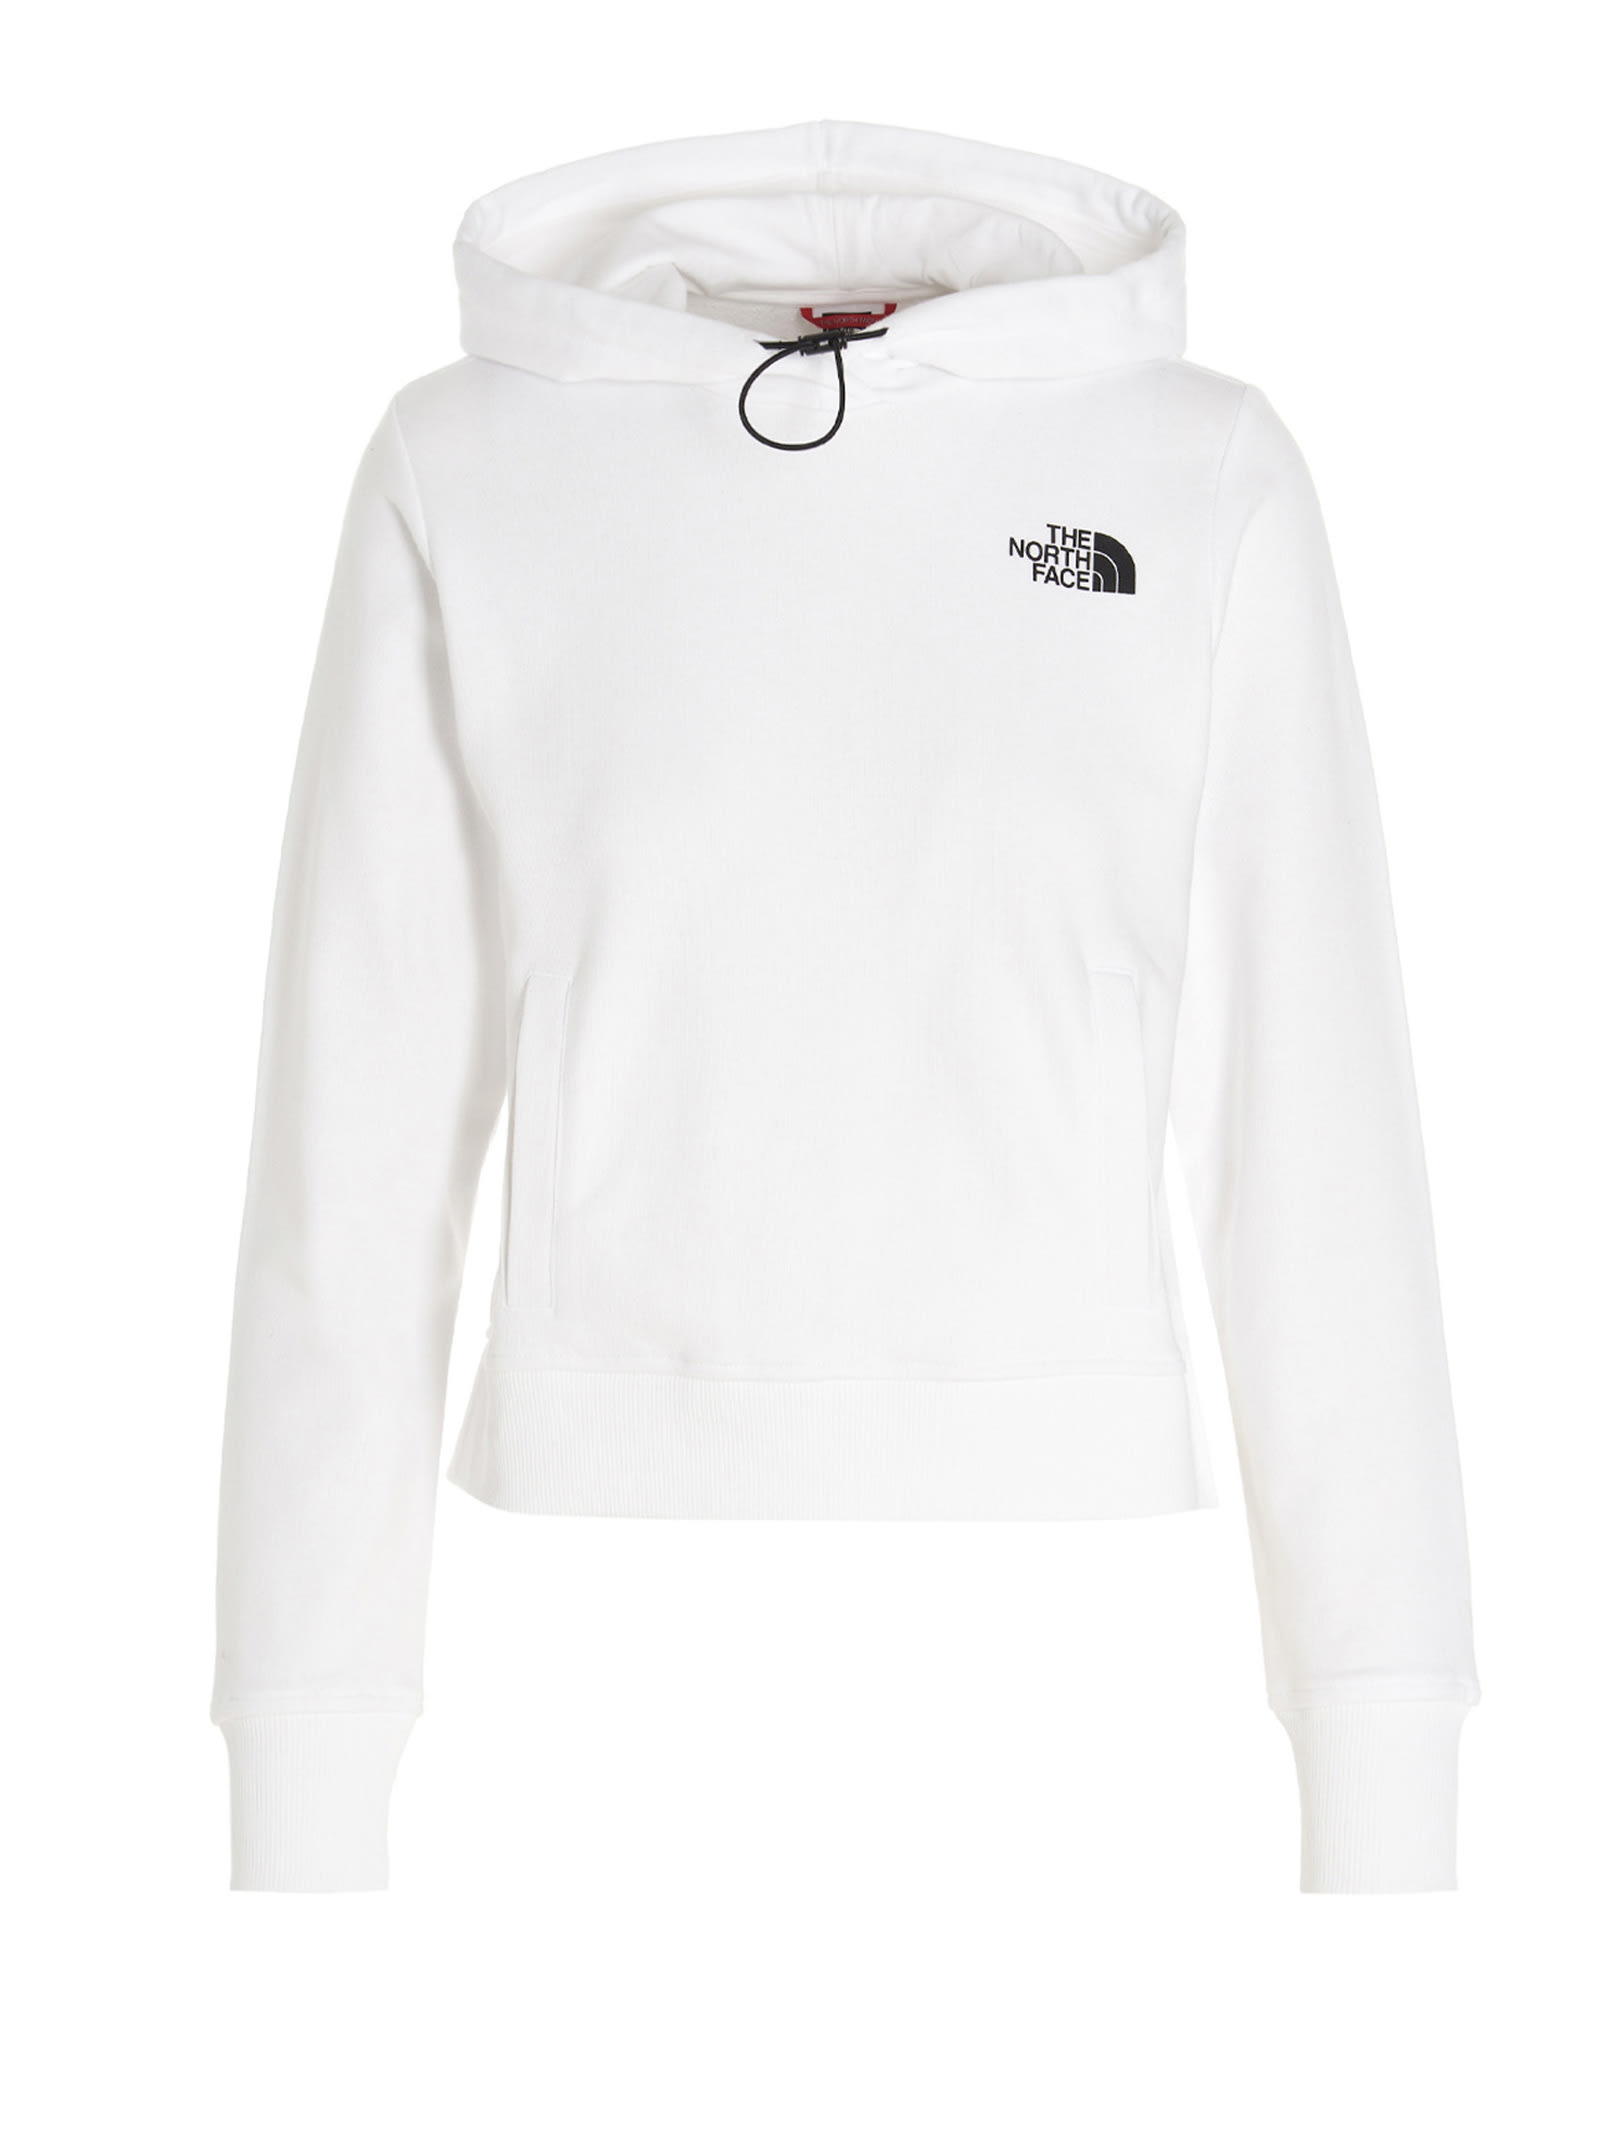 The North Face logo Graphic Hoodie